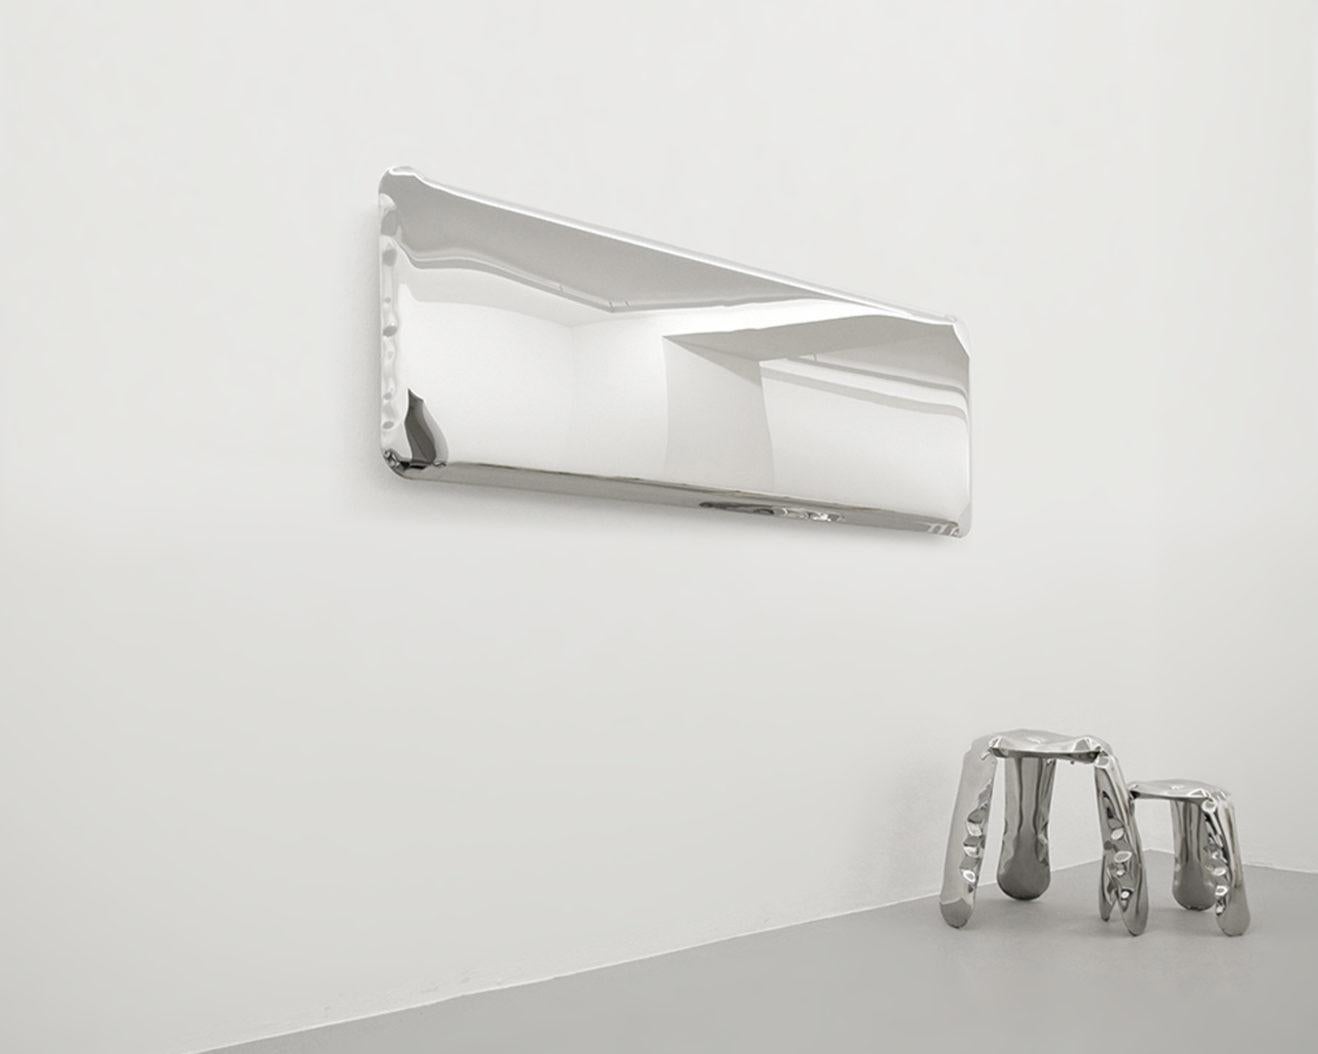 Minimalist Tafla Mirror Q1 in Polished Stainless Steel by Zieta For Sale